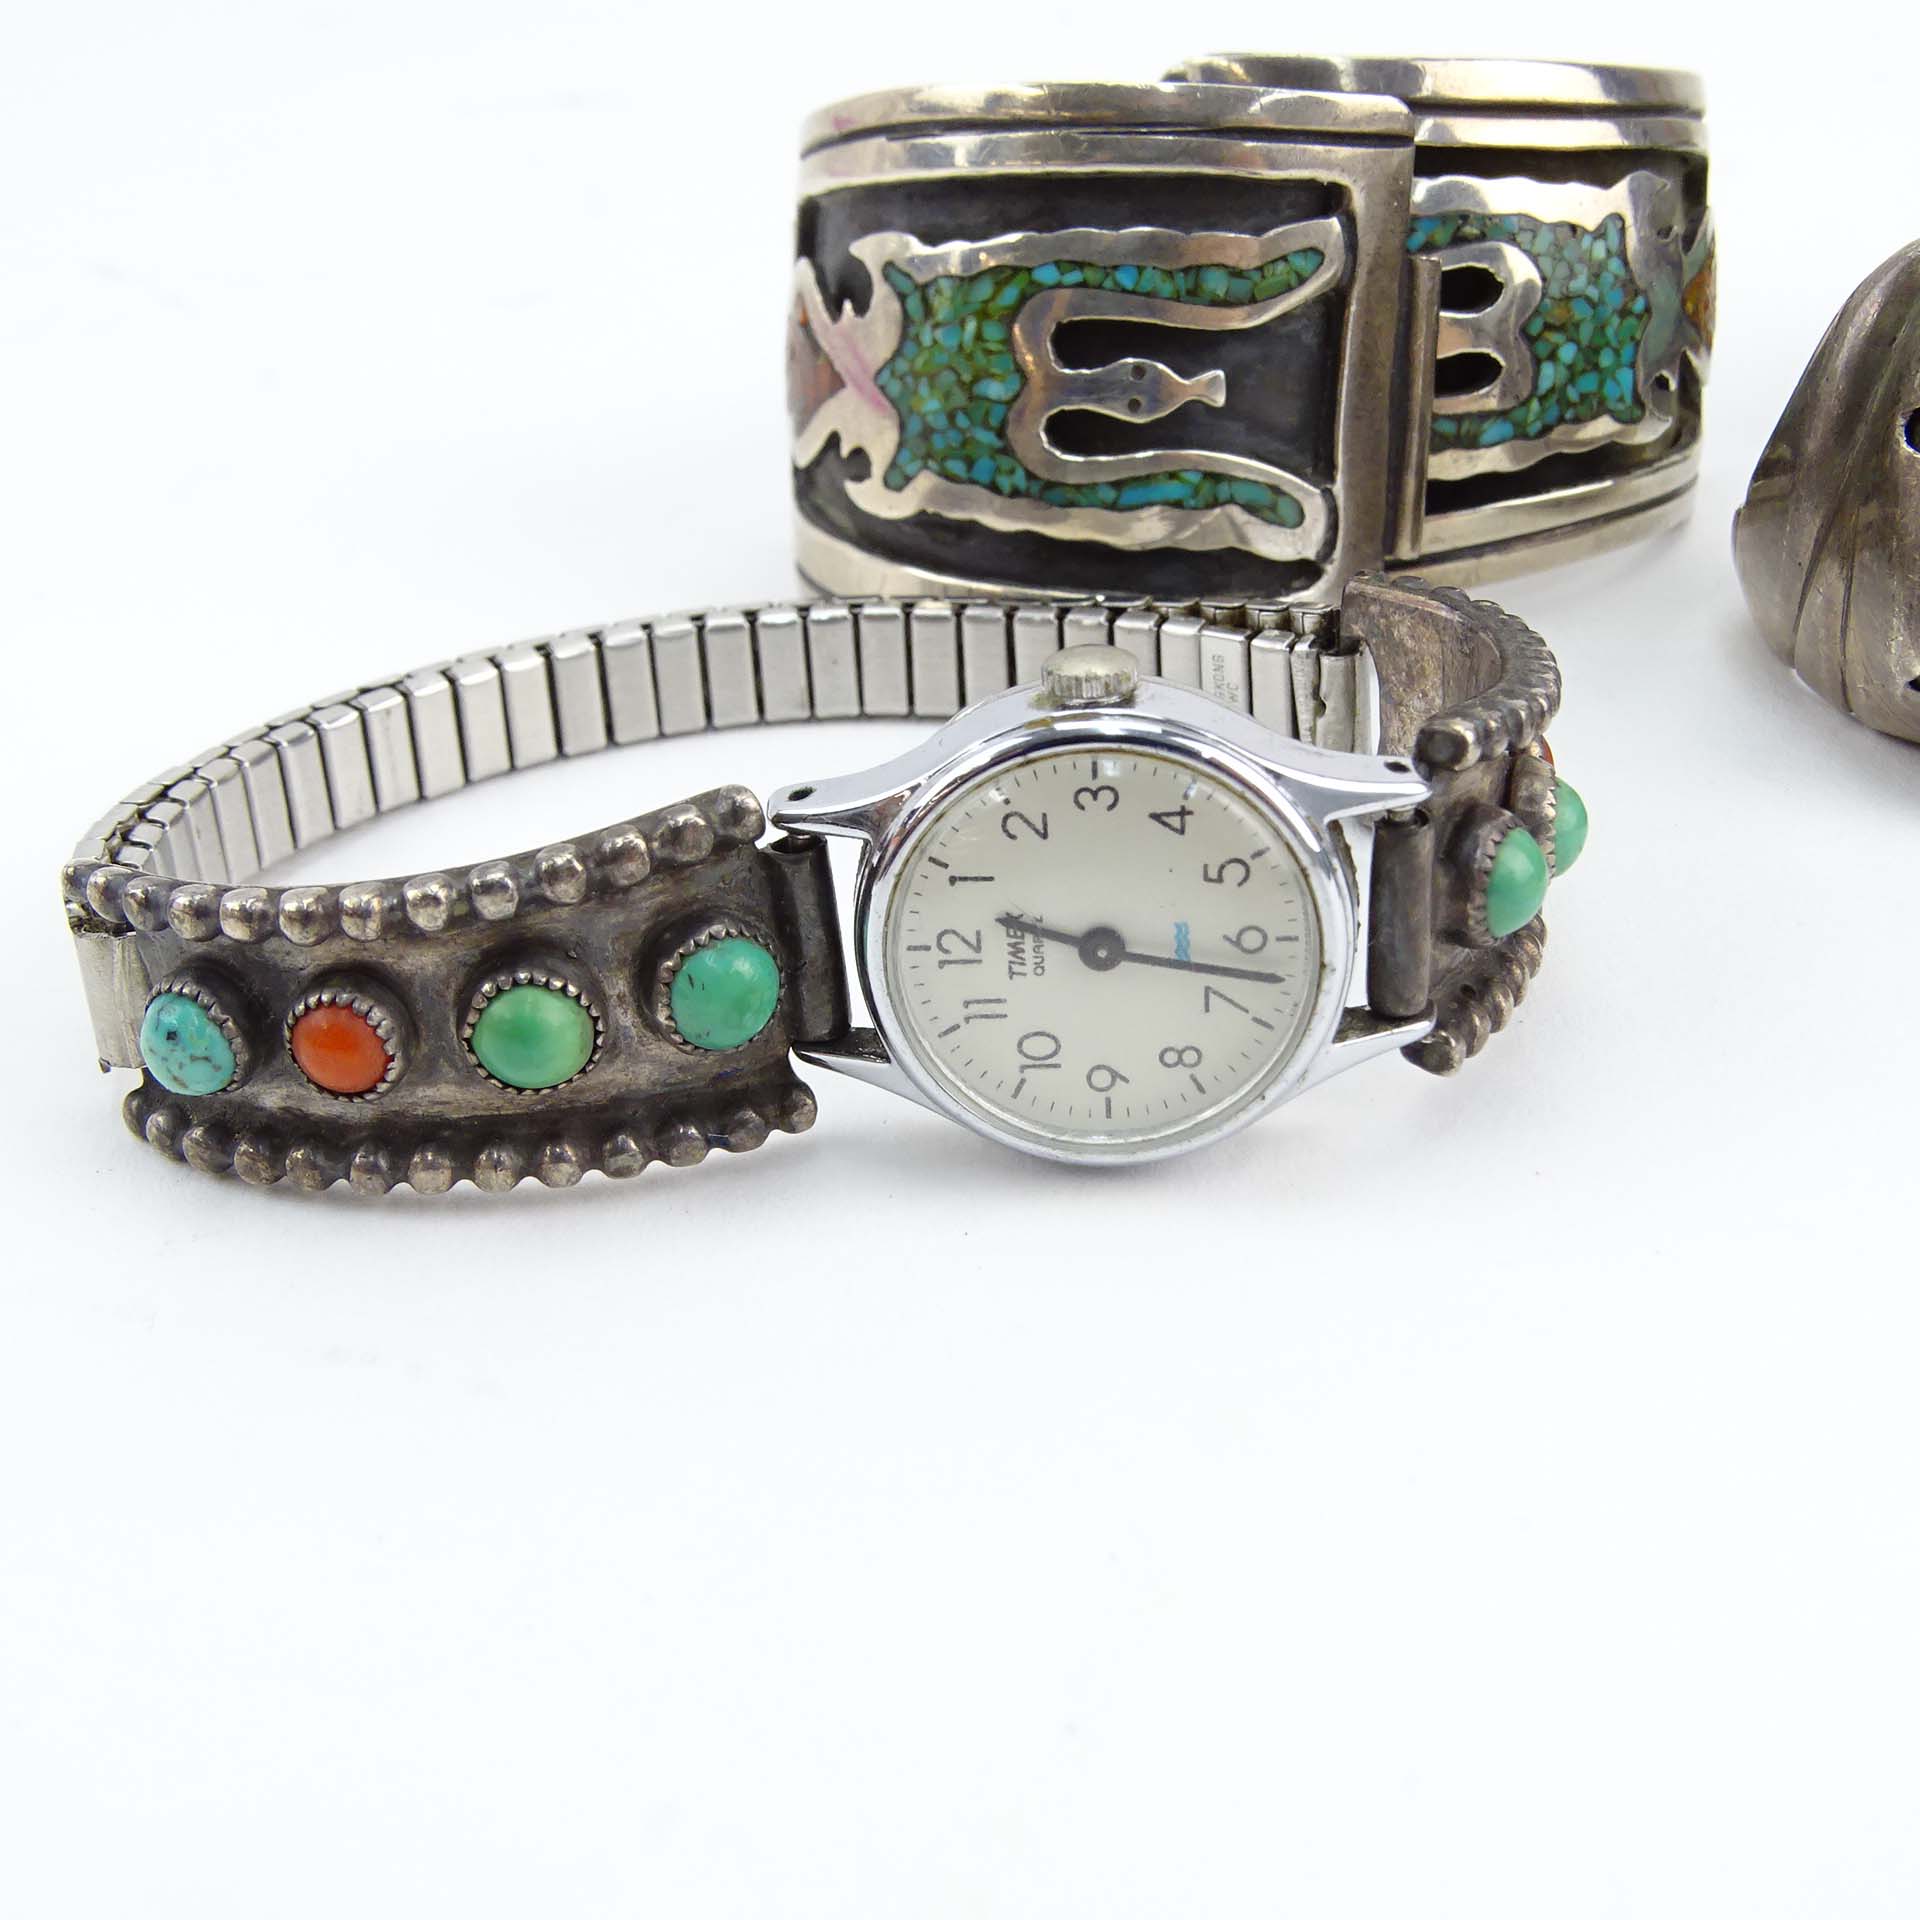 Vintage Seven (7) Piece Collection of Navajo or Navajo style Sterling Silver and Turquoise Jewelry.